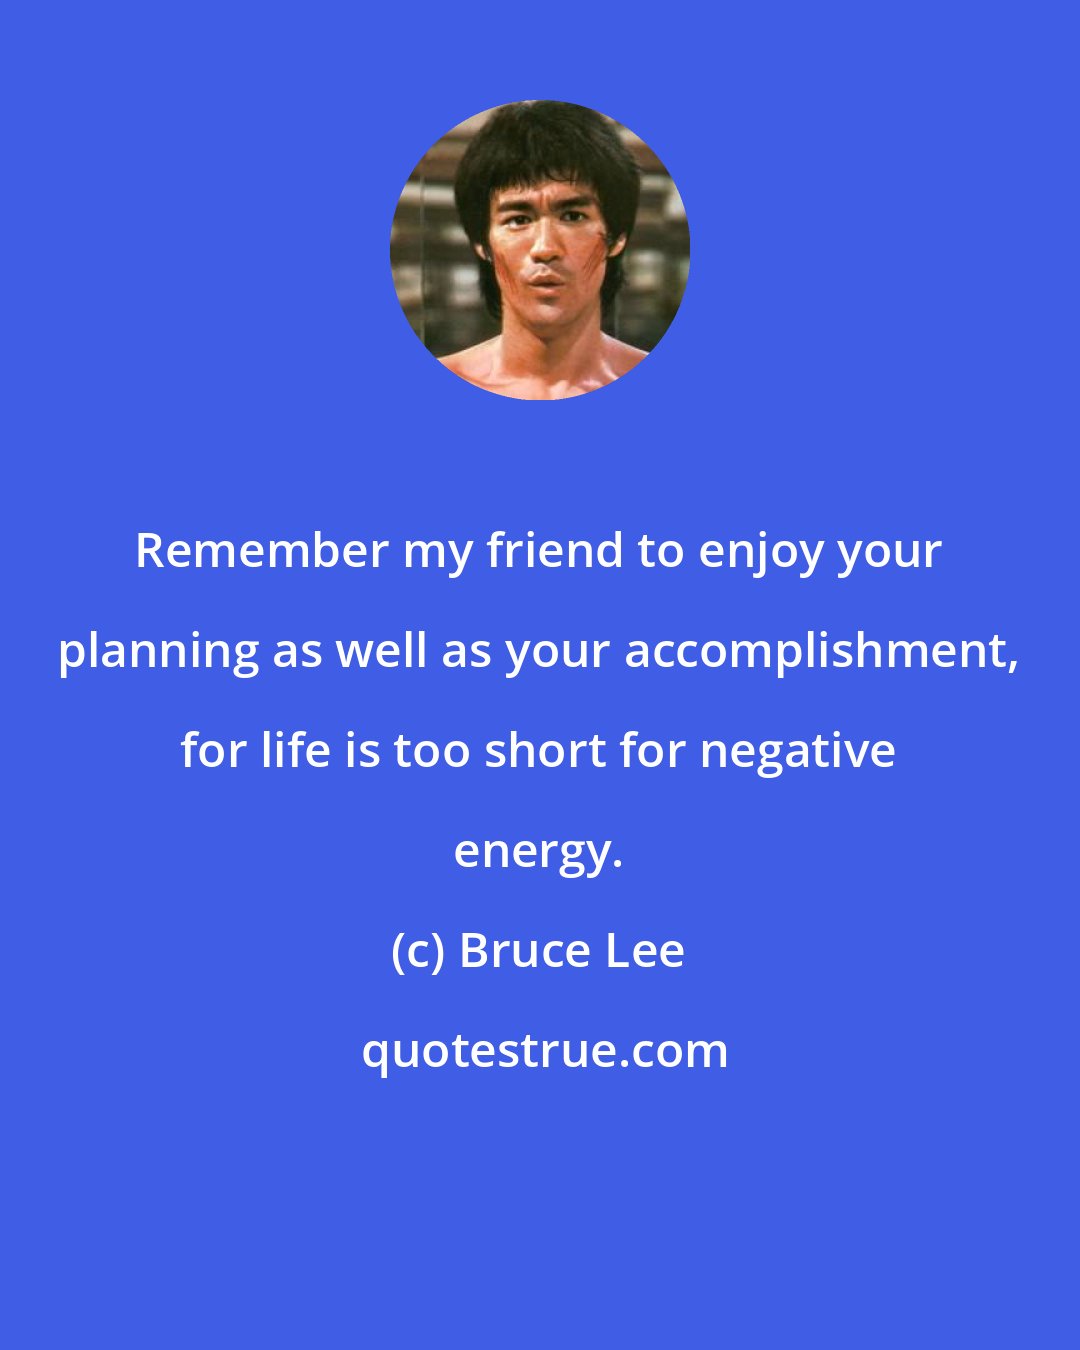 Bruce Lee: Remember my friend to enjoy your planning as well as your accomplishment, for life is too short for negative energy.